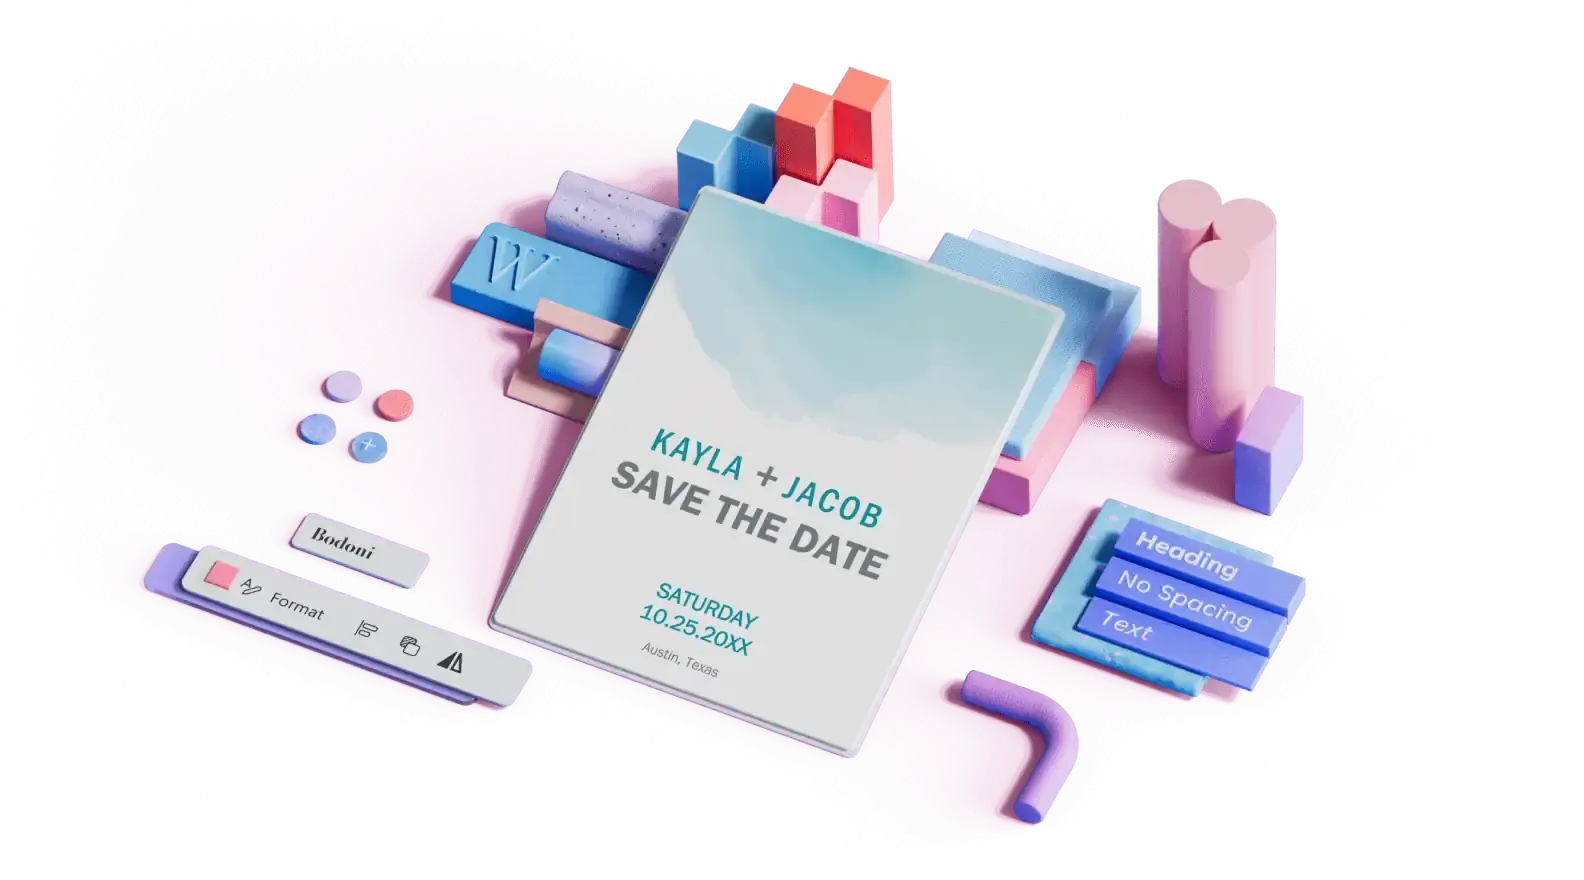 Save the date wedding template surrounded by 3D design elements